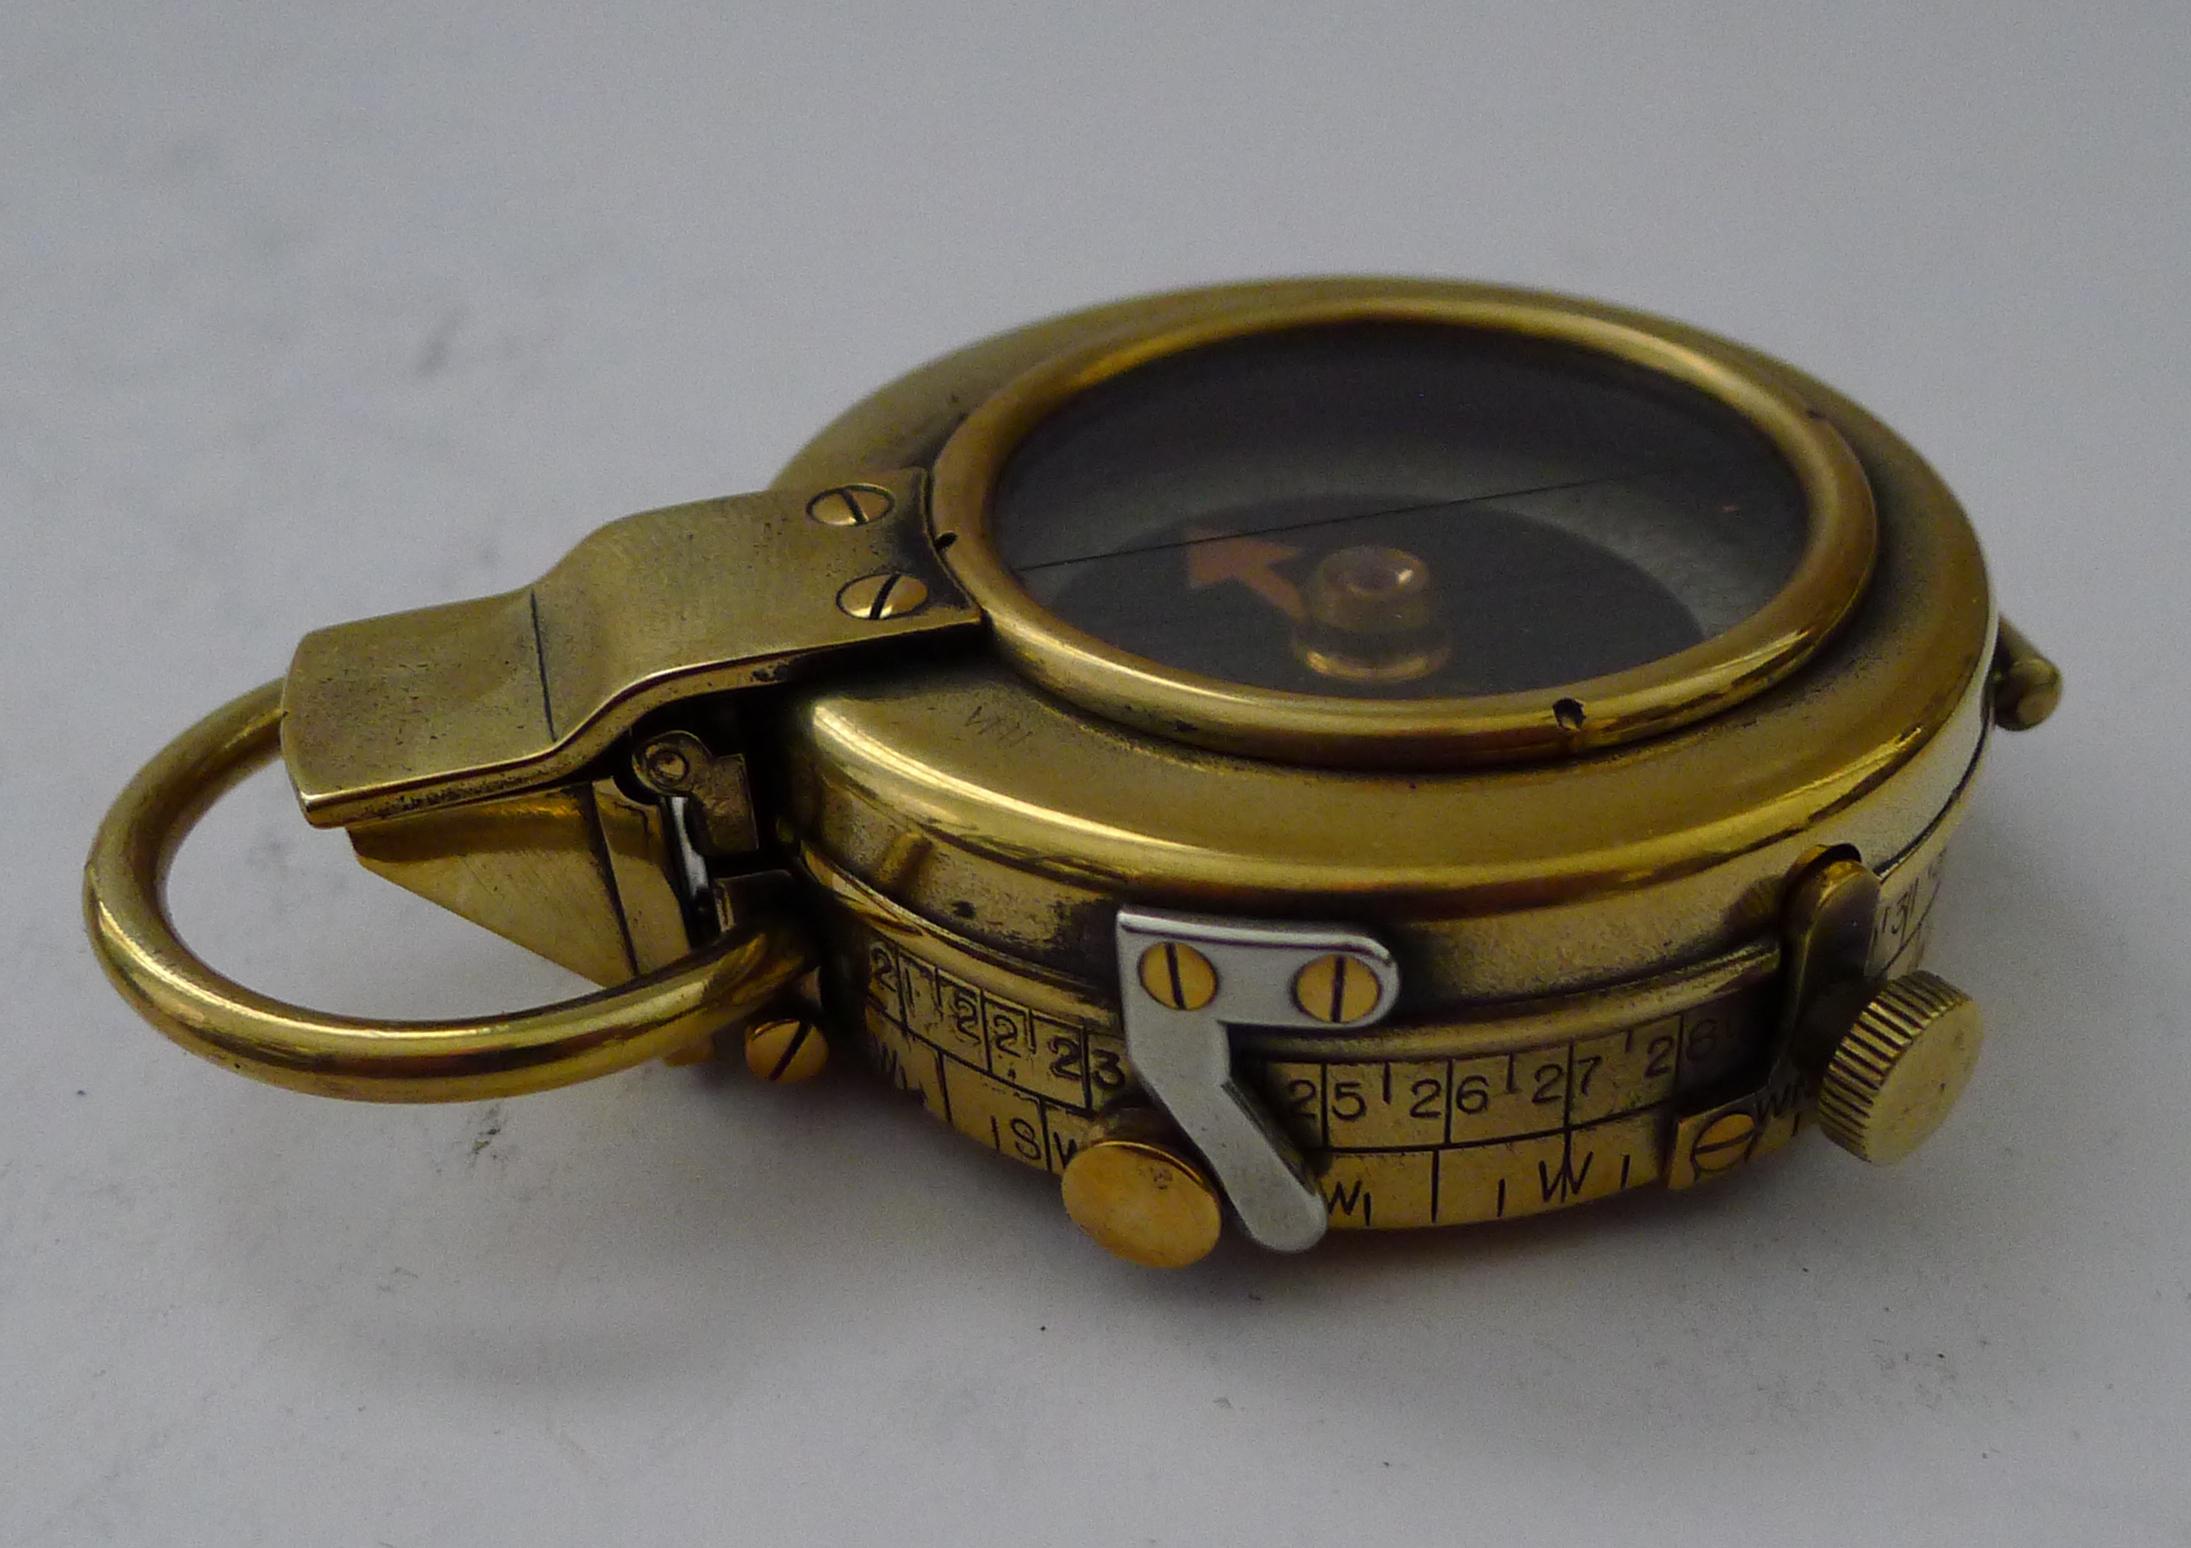 WW1 1918 British Army Officer's Compass - Verner's Patent MK VII by French Ltd. For Sale 3